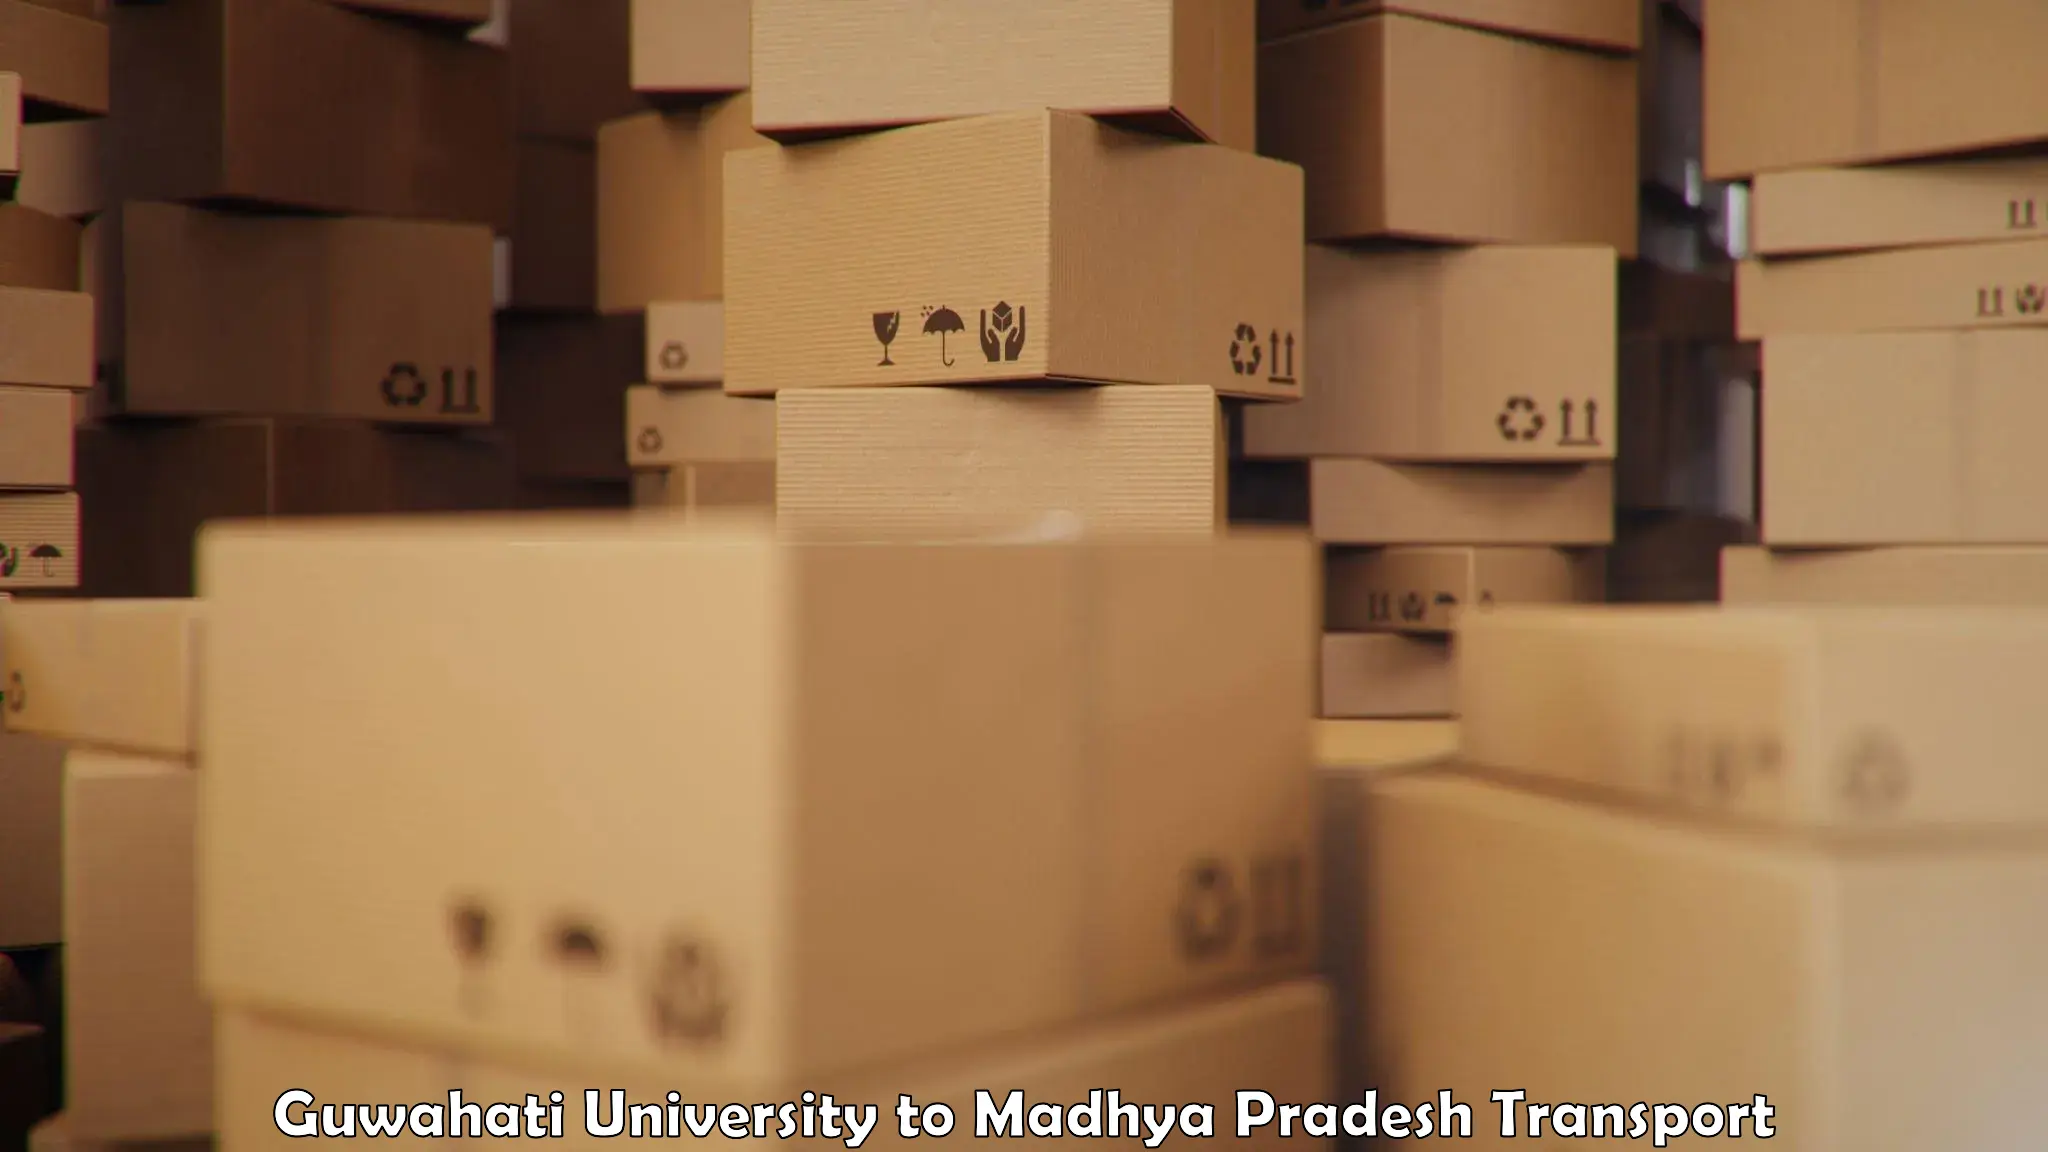 Shipping services Guwahati University to NIT Bhopal